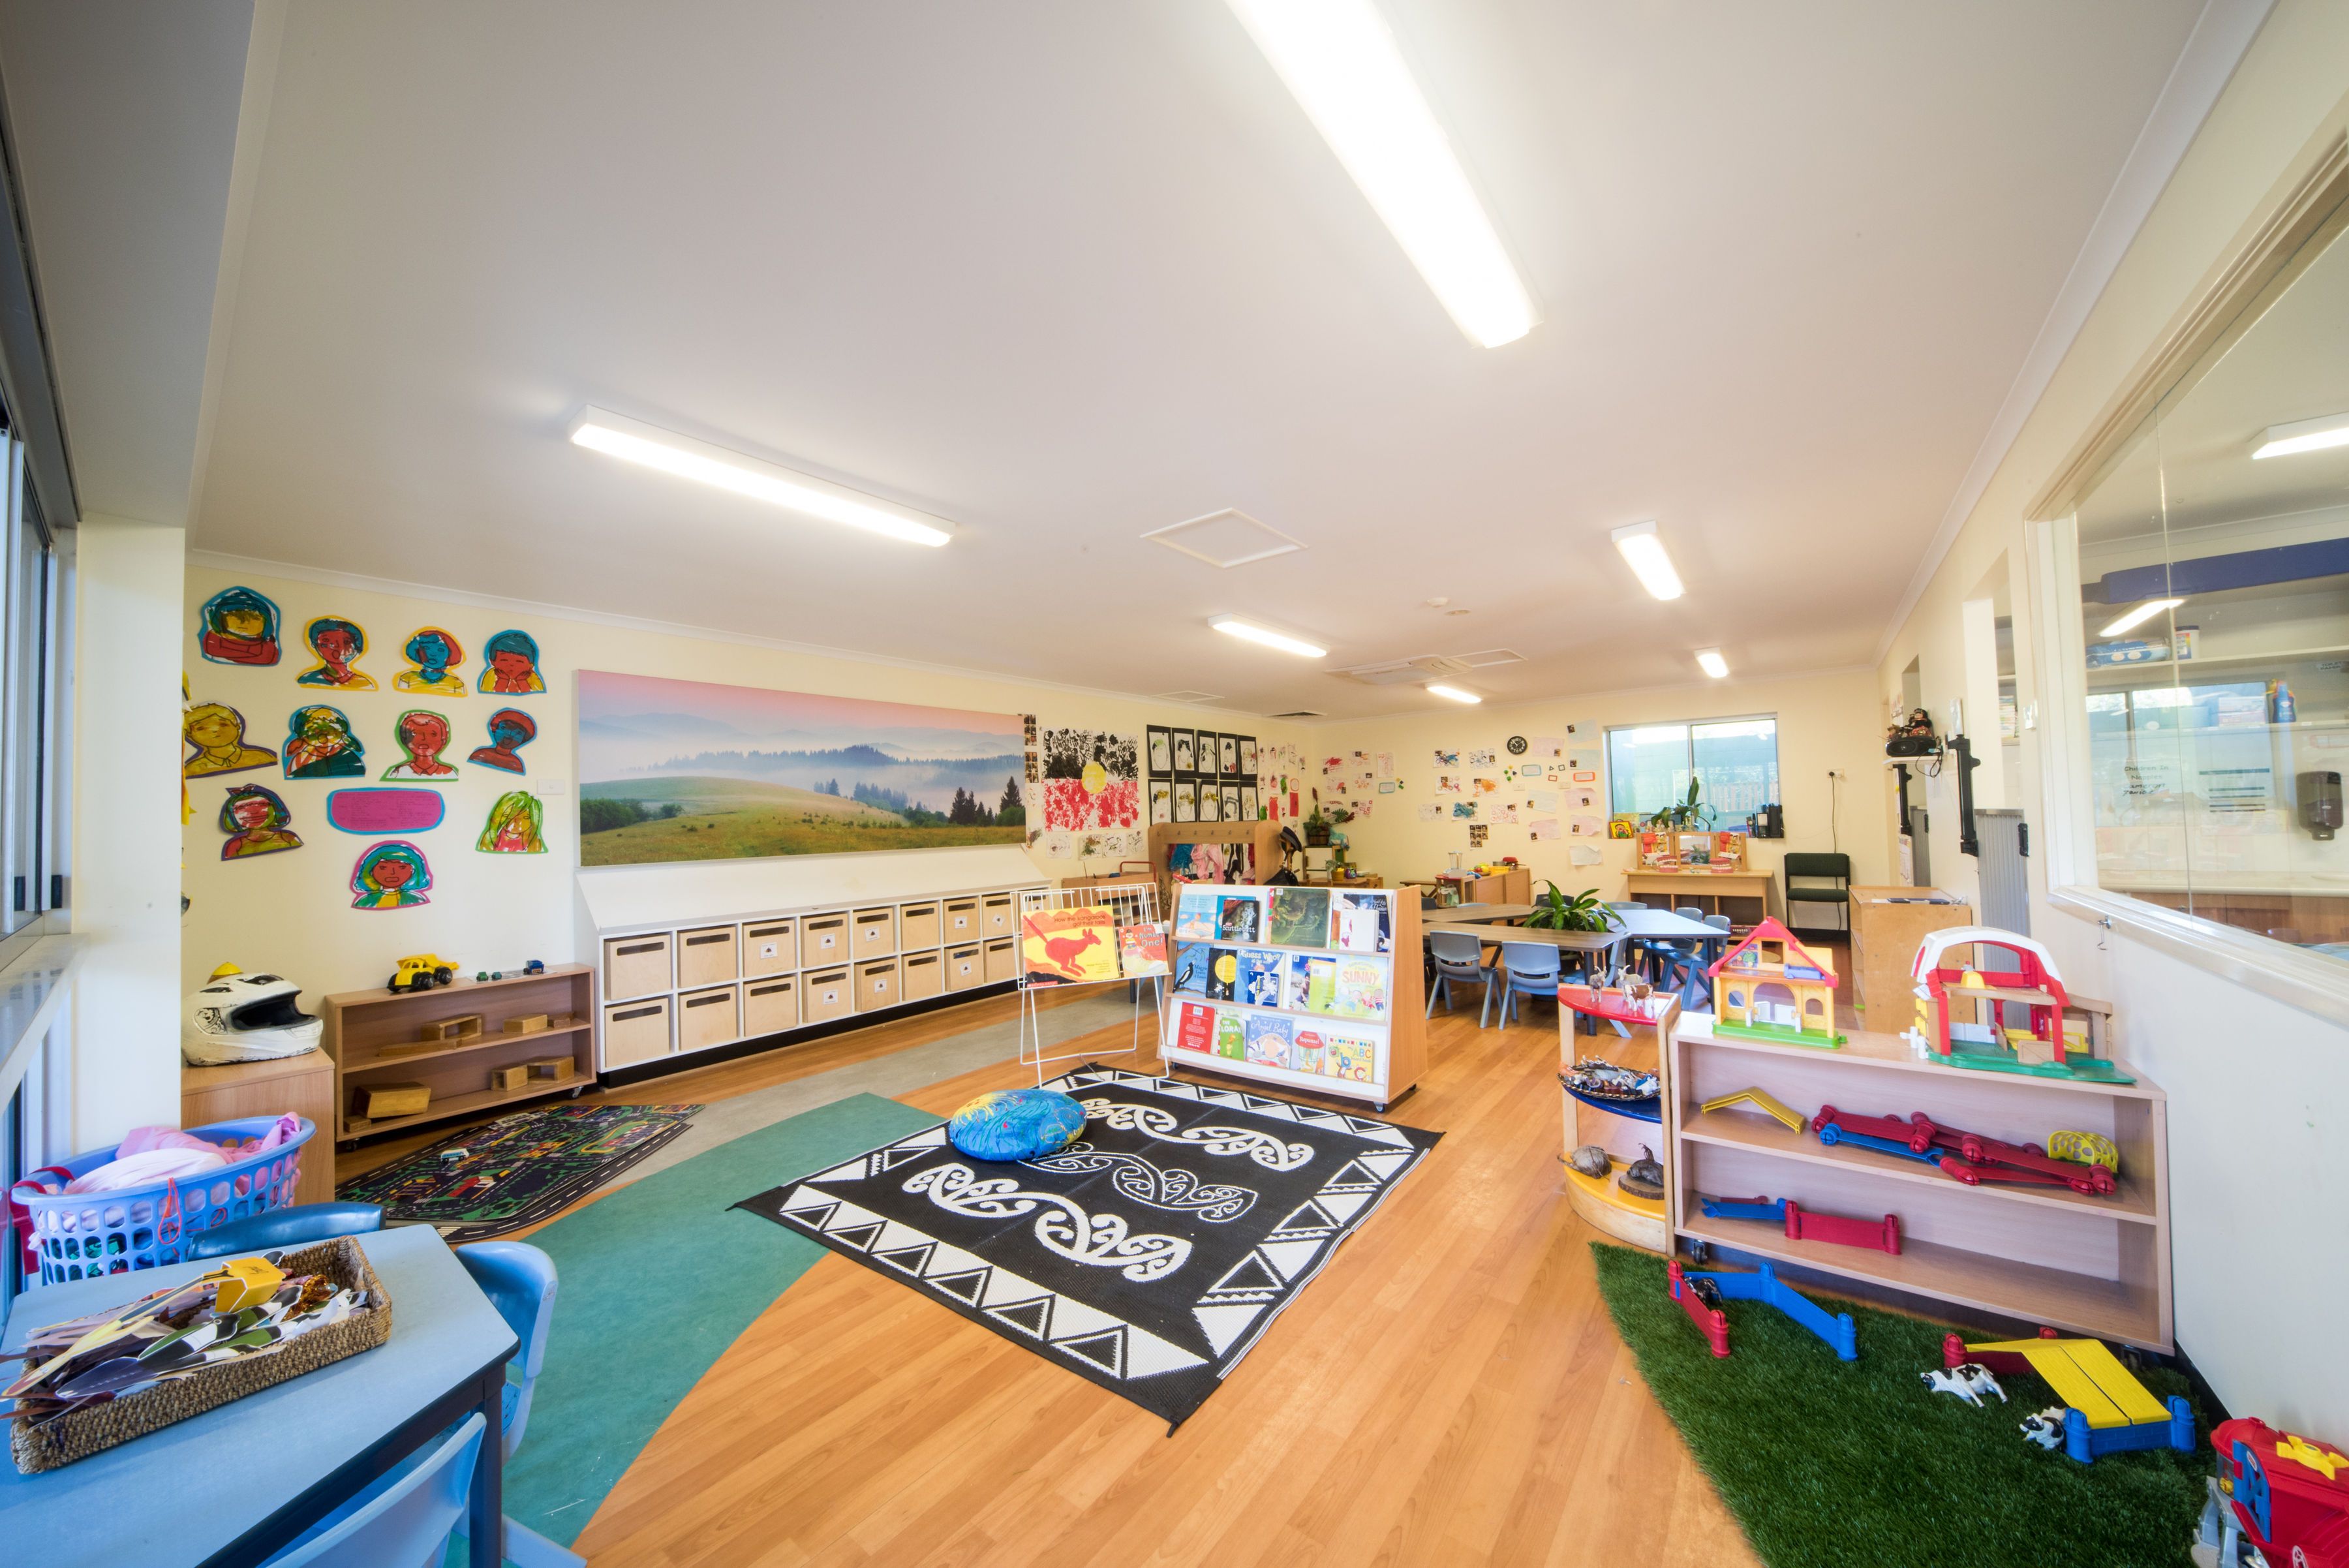 A bright kindergarten room filled with books and toys